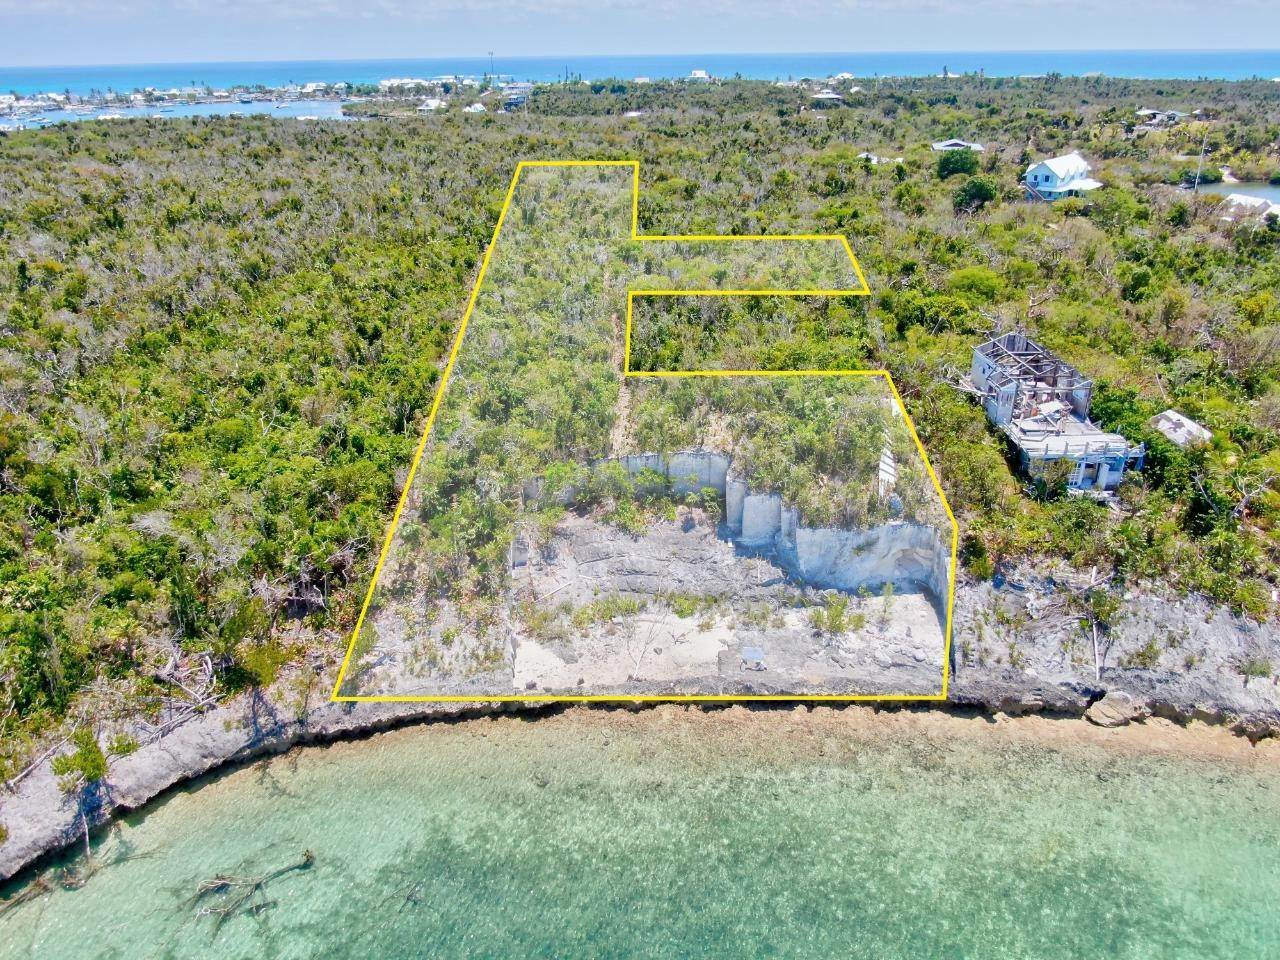 Lots / Acreage for Sale at Elbow Cay, Abaco, Bahamas